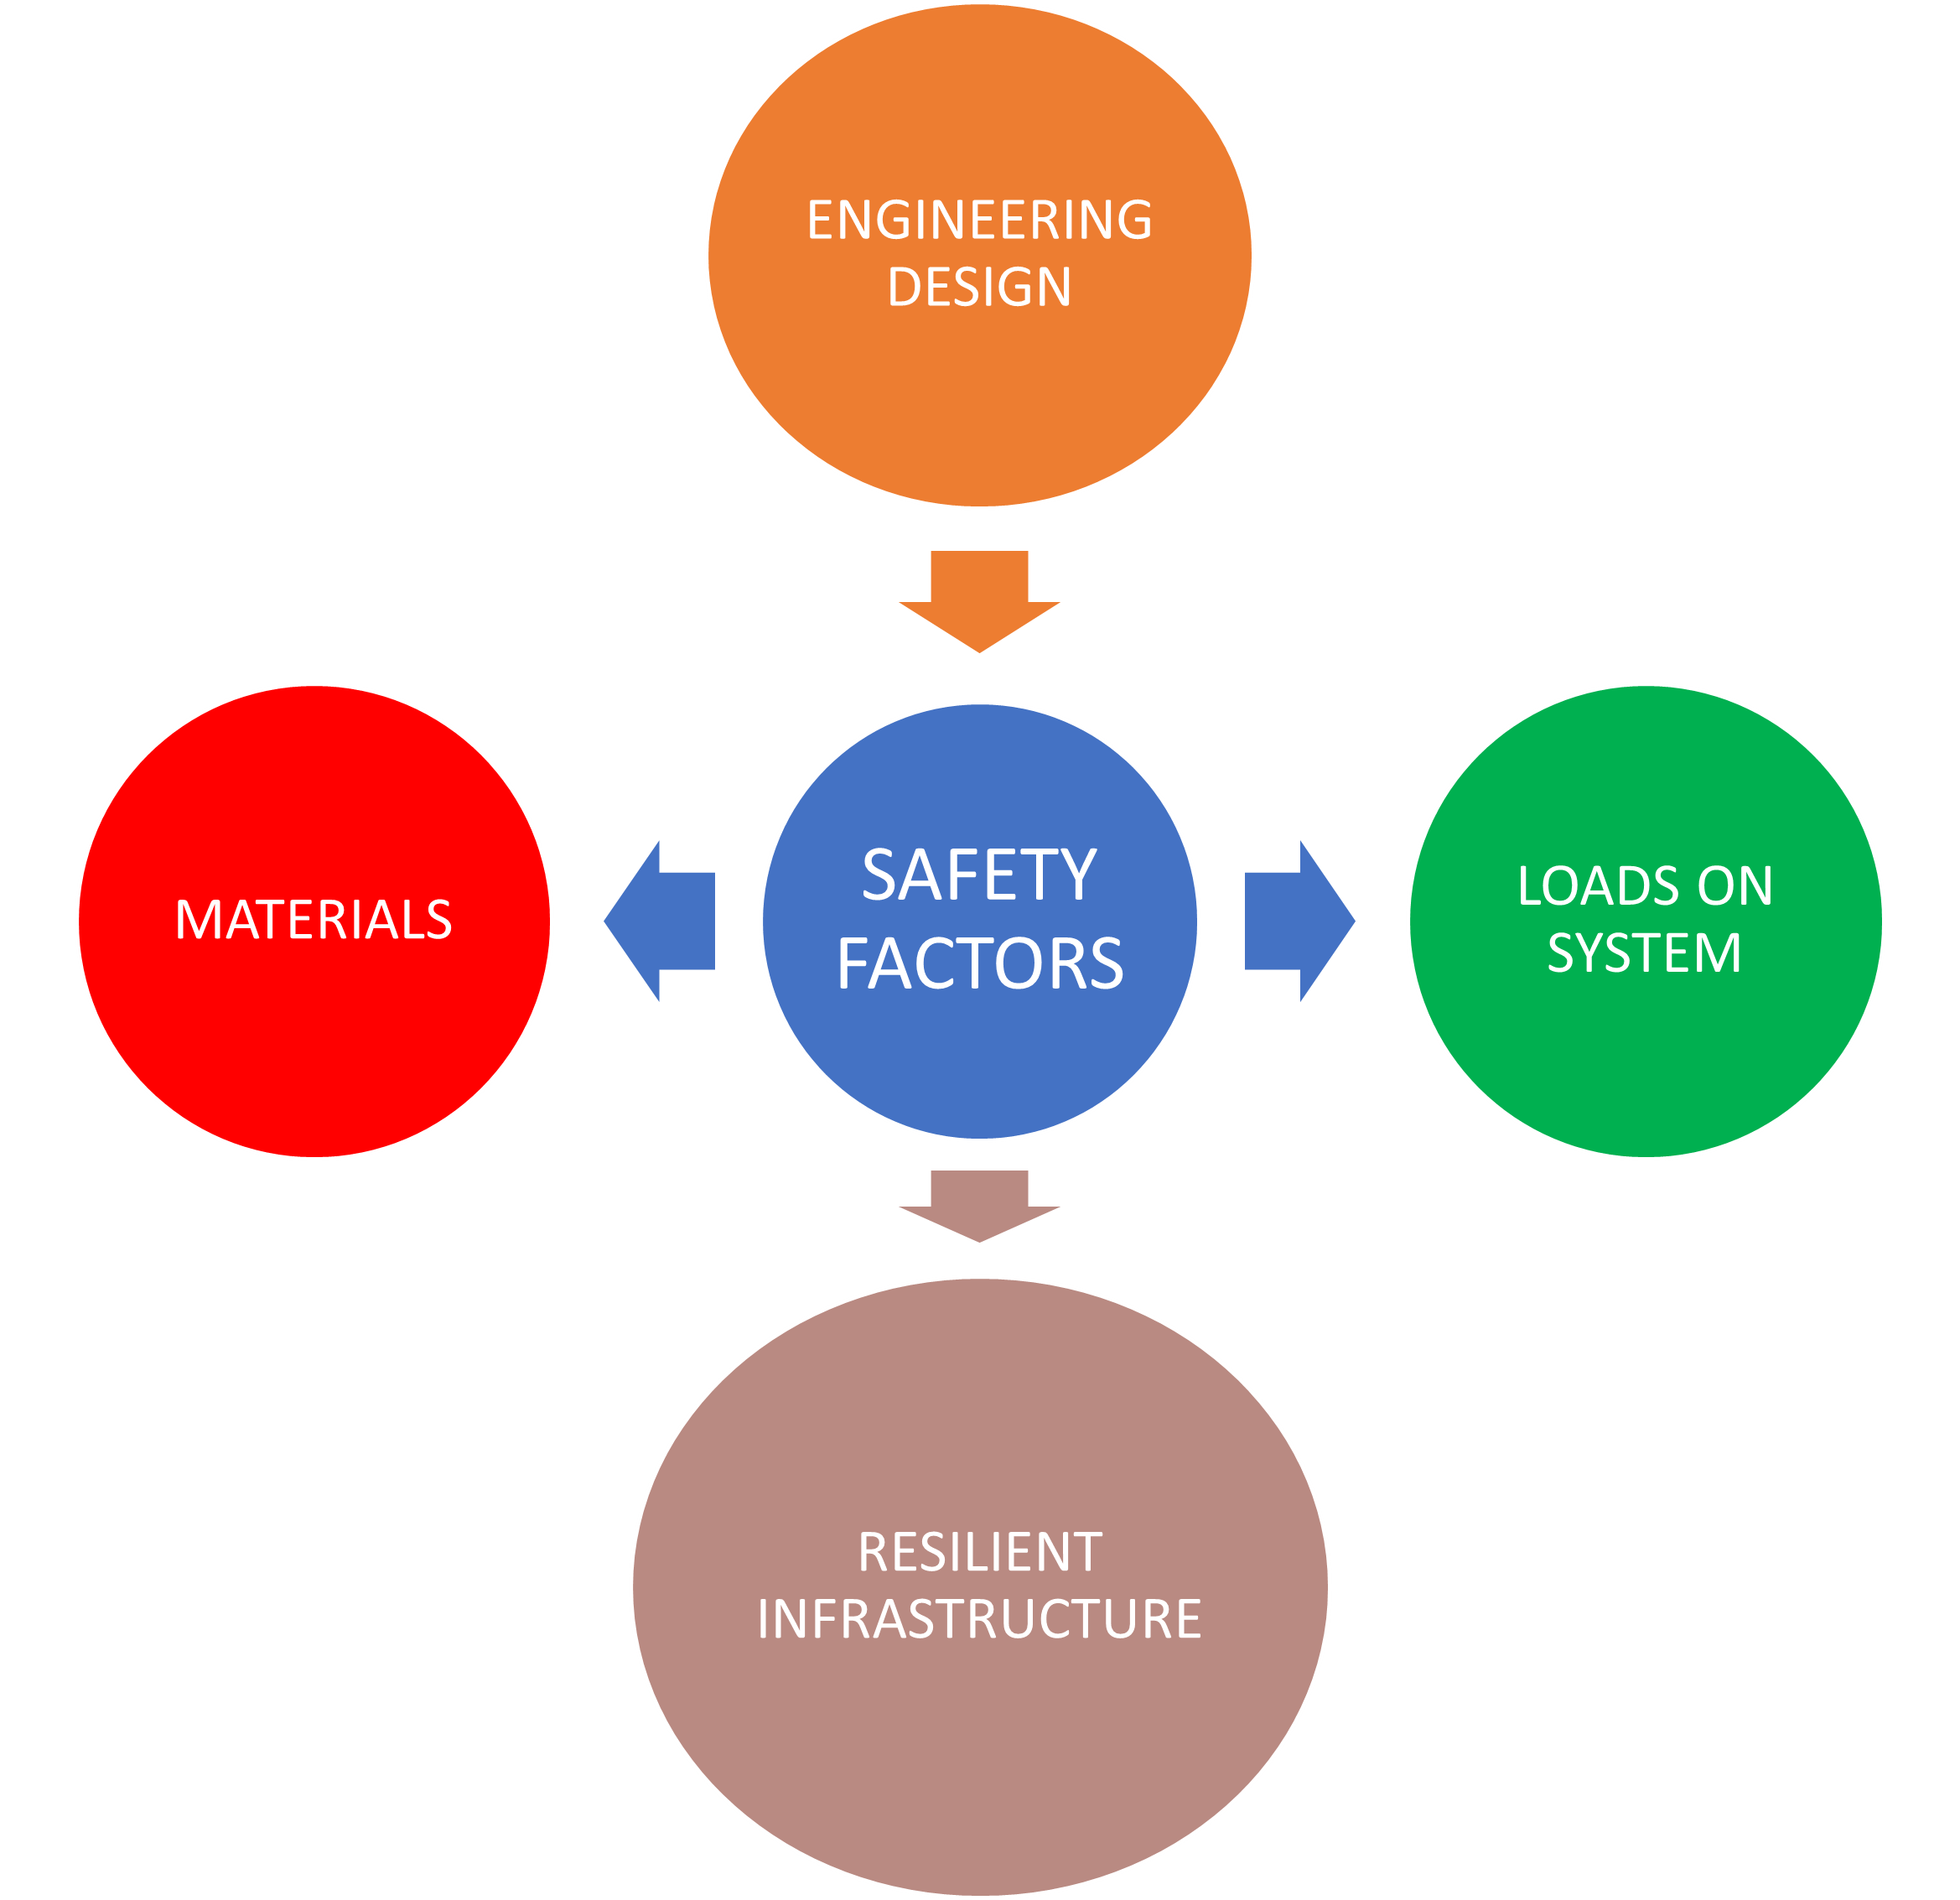 Defining Factor of Safety for Design and Use